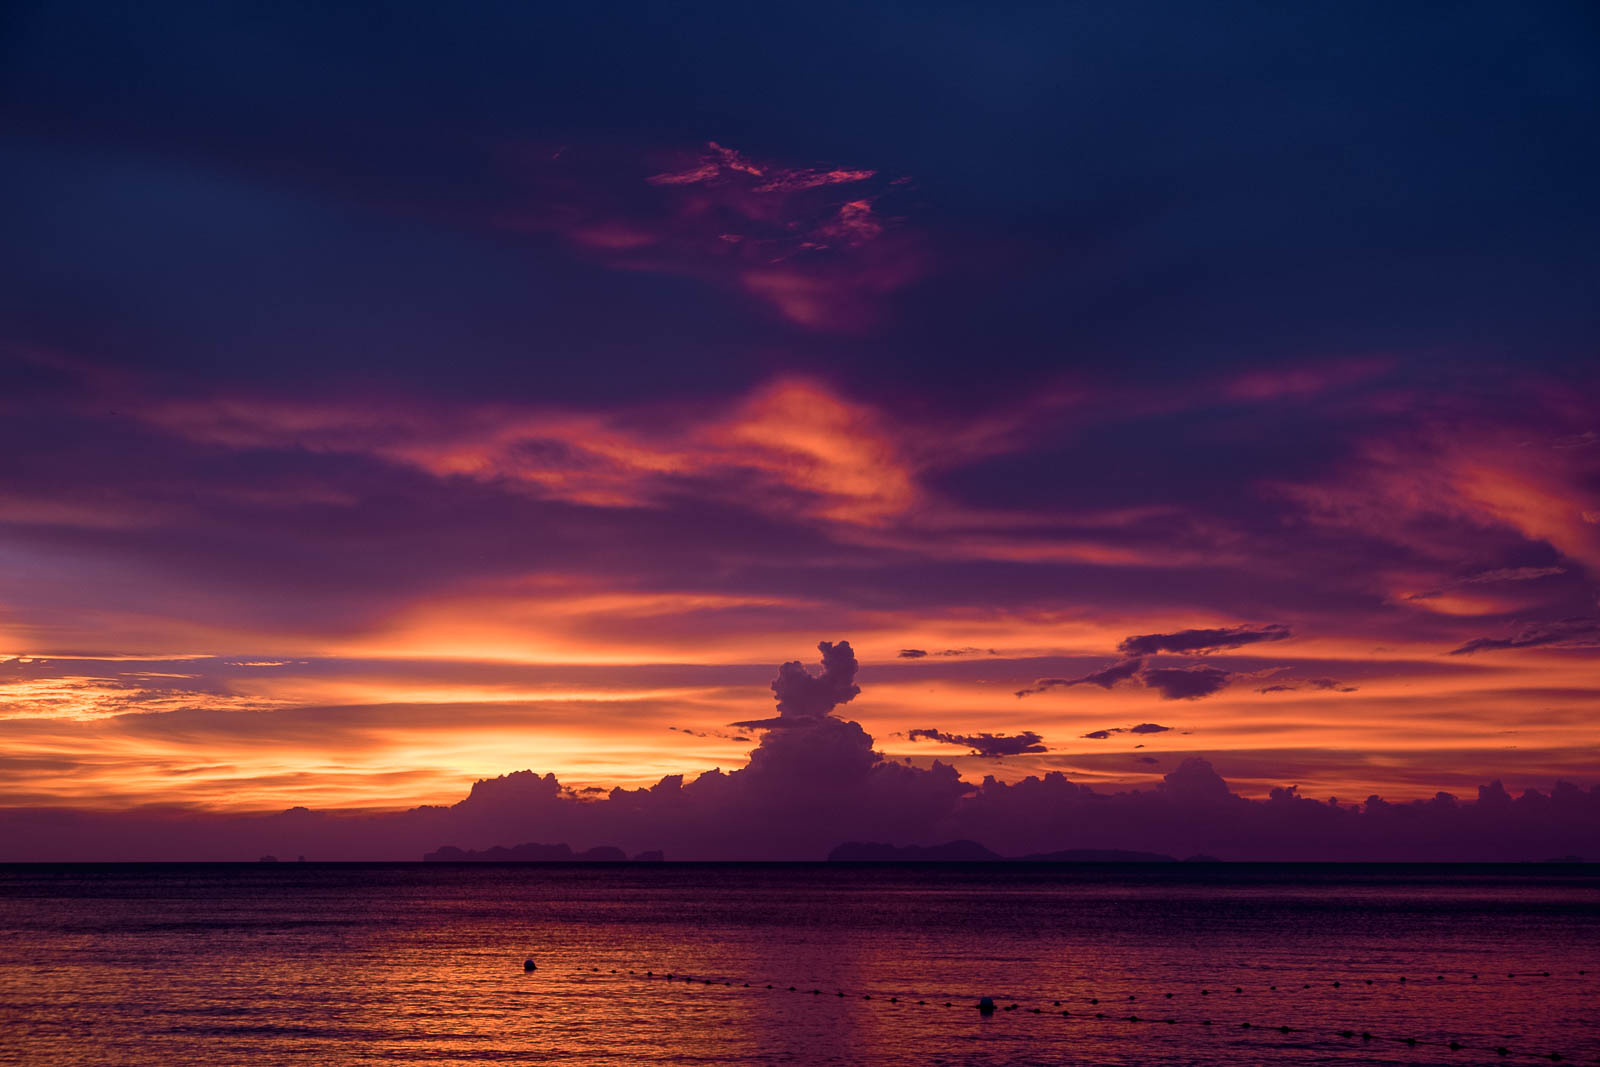 Amazing clouds after a rainstorm during sunset on Ko Lanta, Thailand